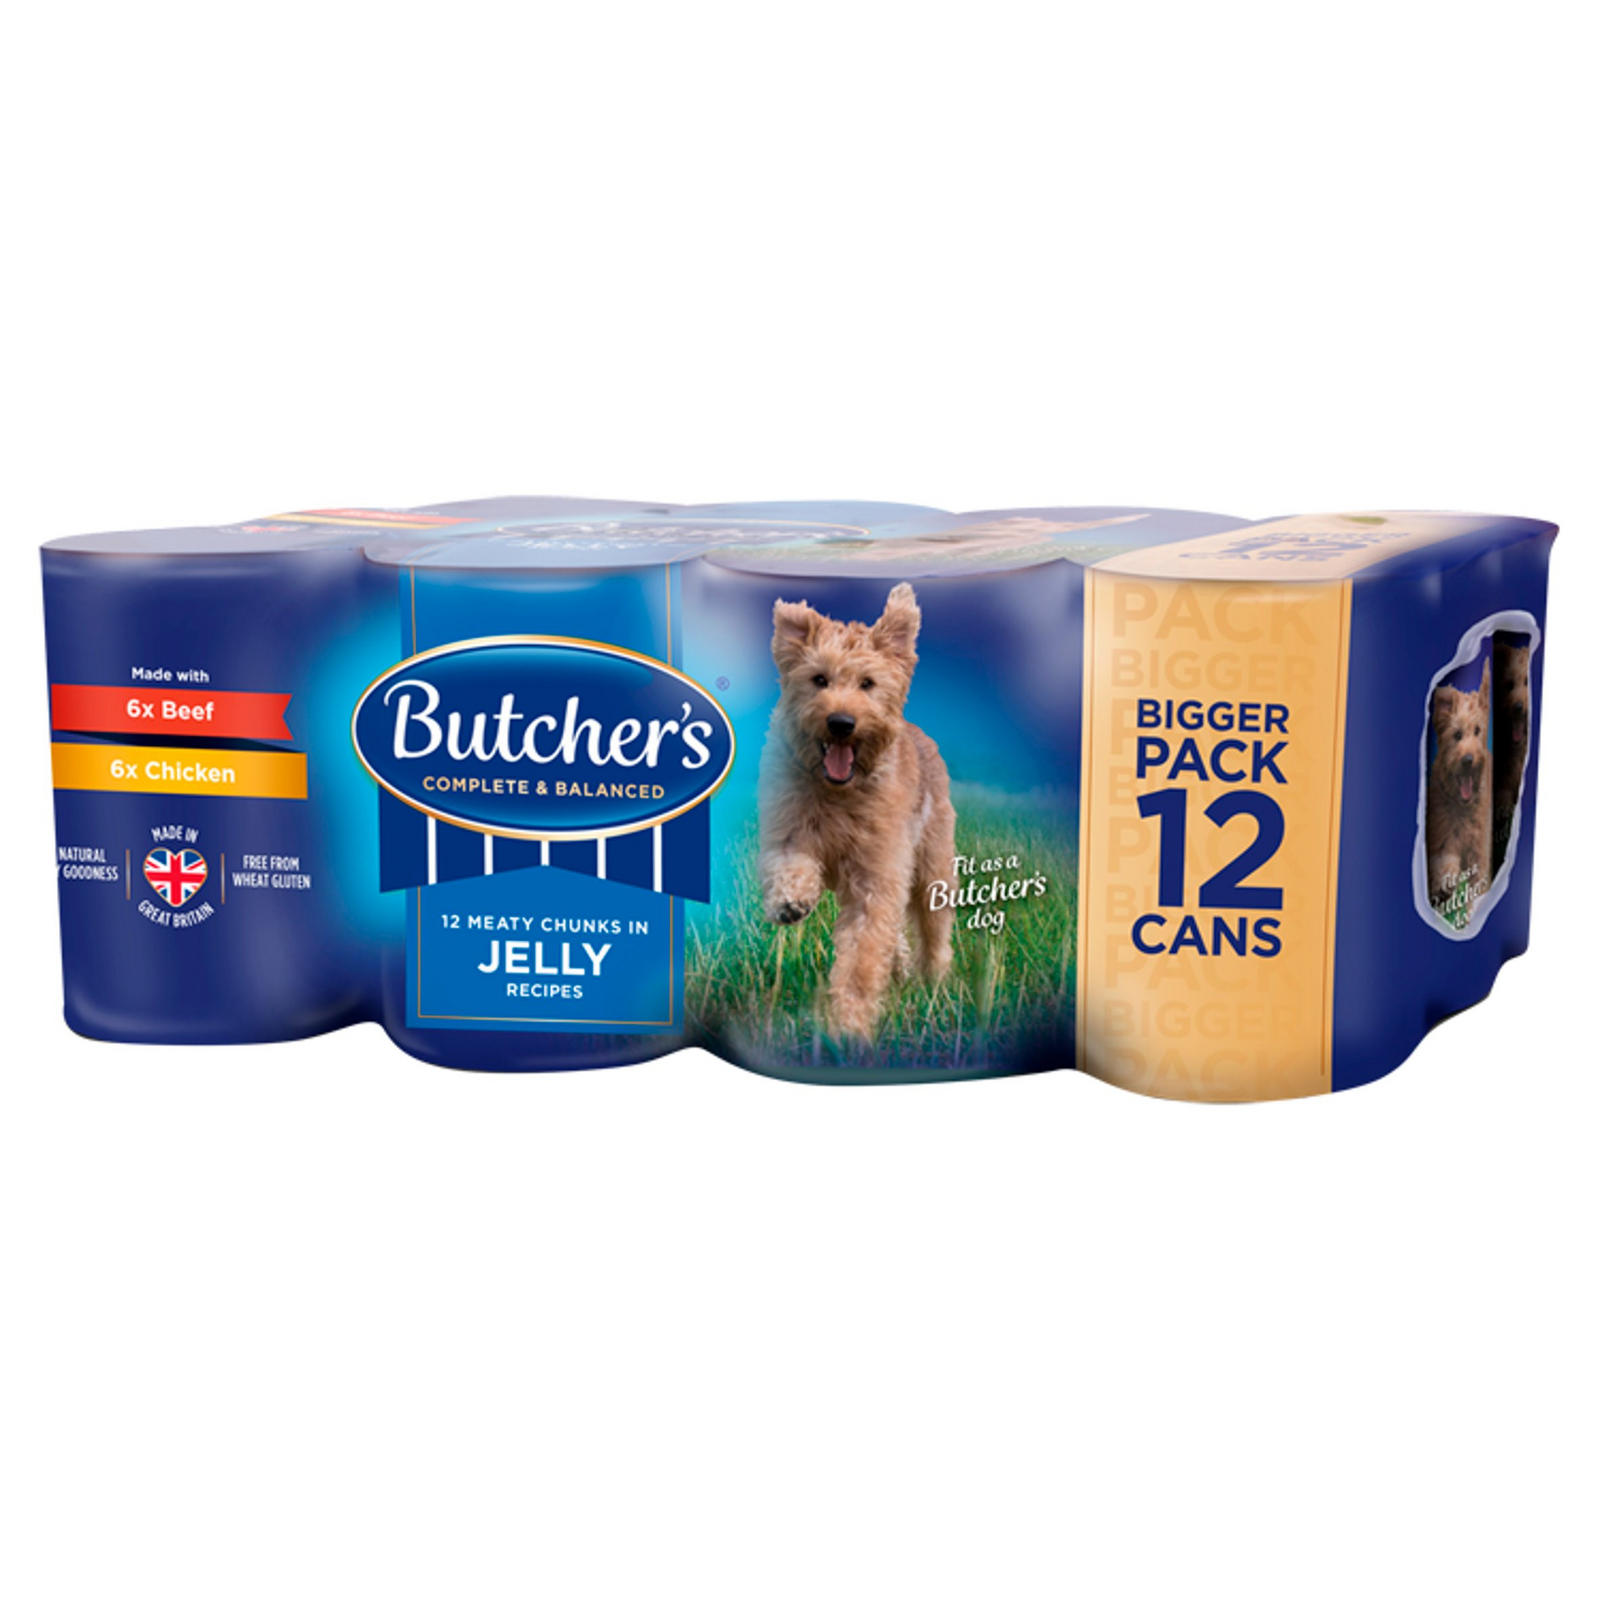 Butcher's Chunks in Jelly Recipes Wet Dog Food Tins 12 x